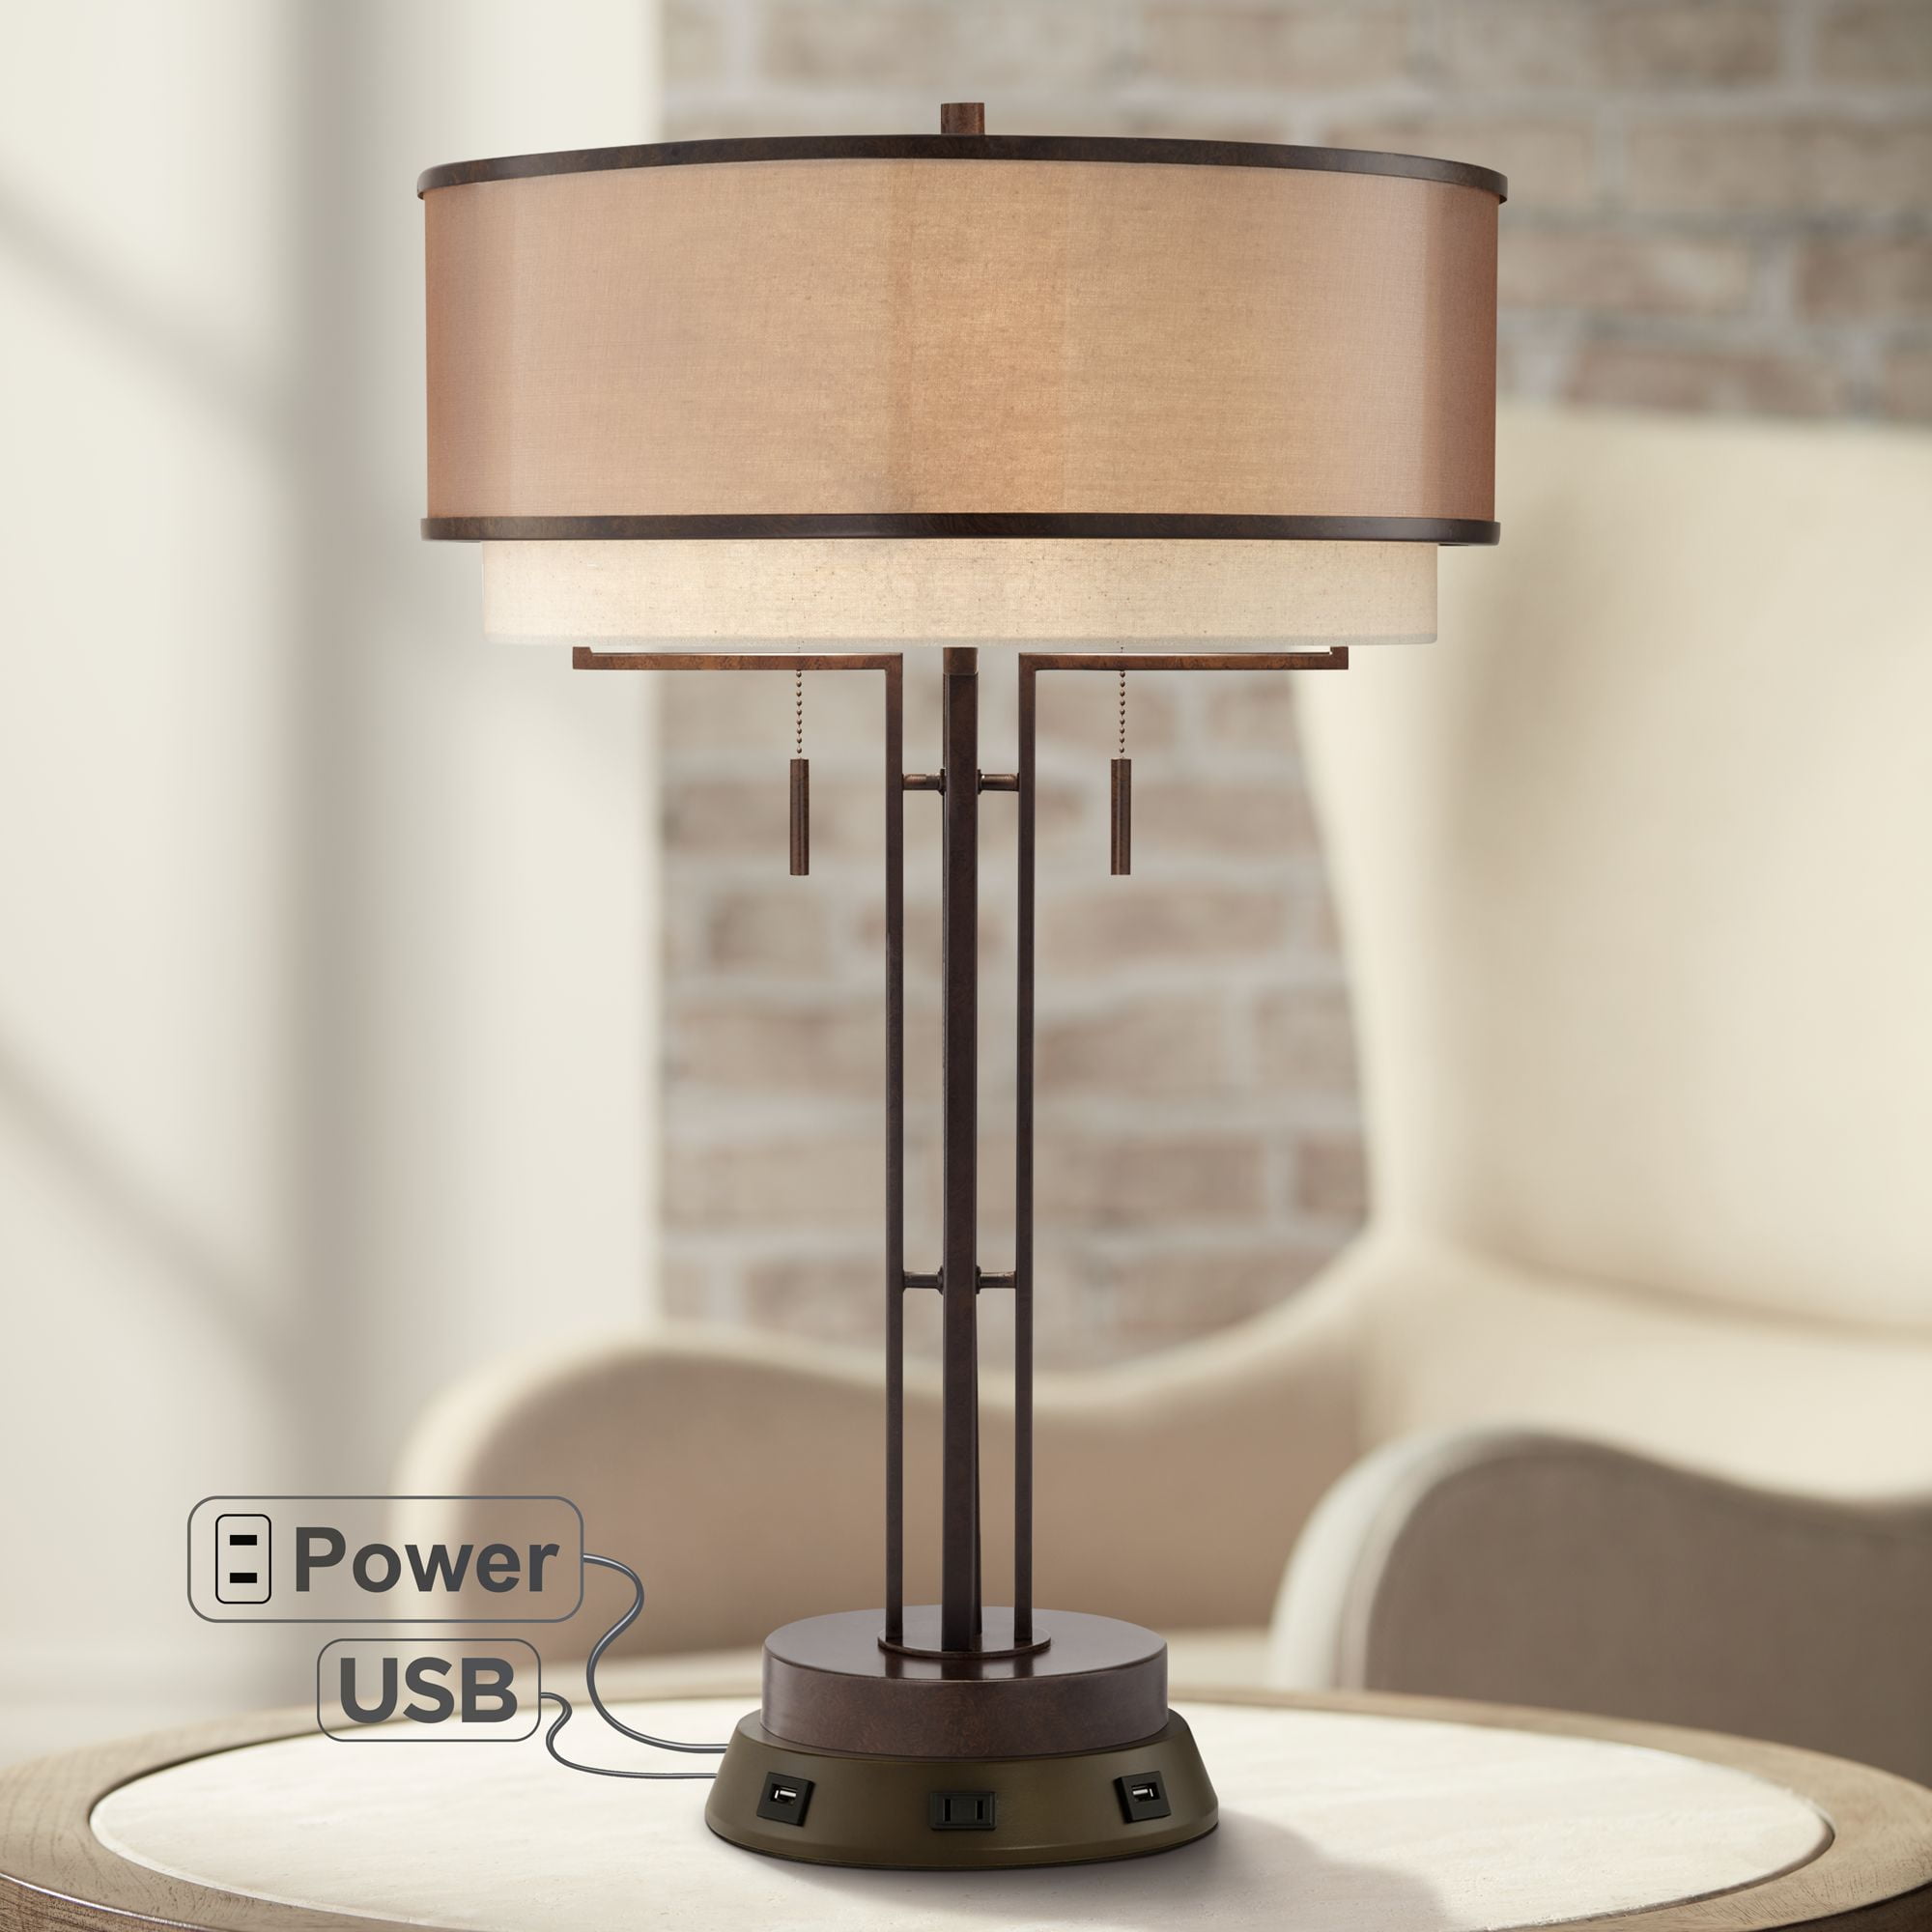 Franklin Iron Works Industrial Table, Franklin Iron Works Industrial Table Lamp With Usb Port